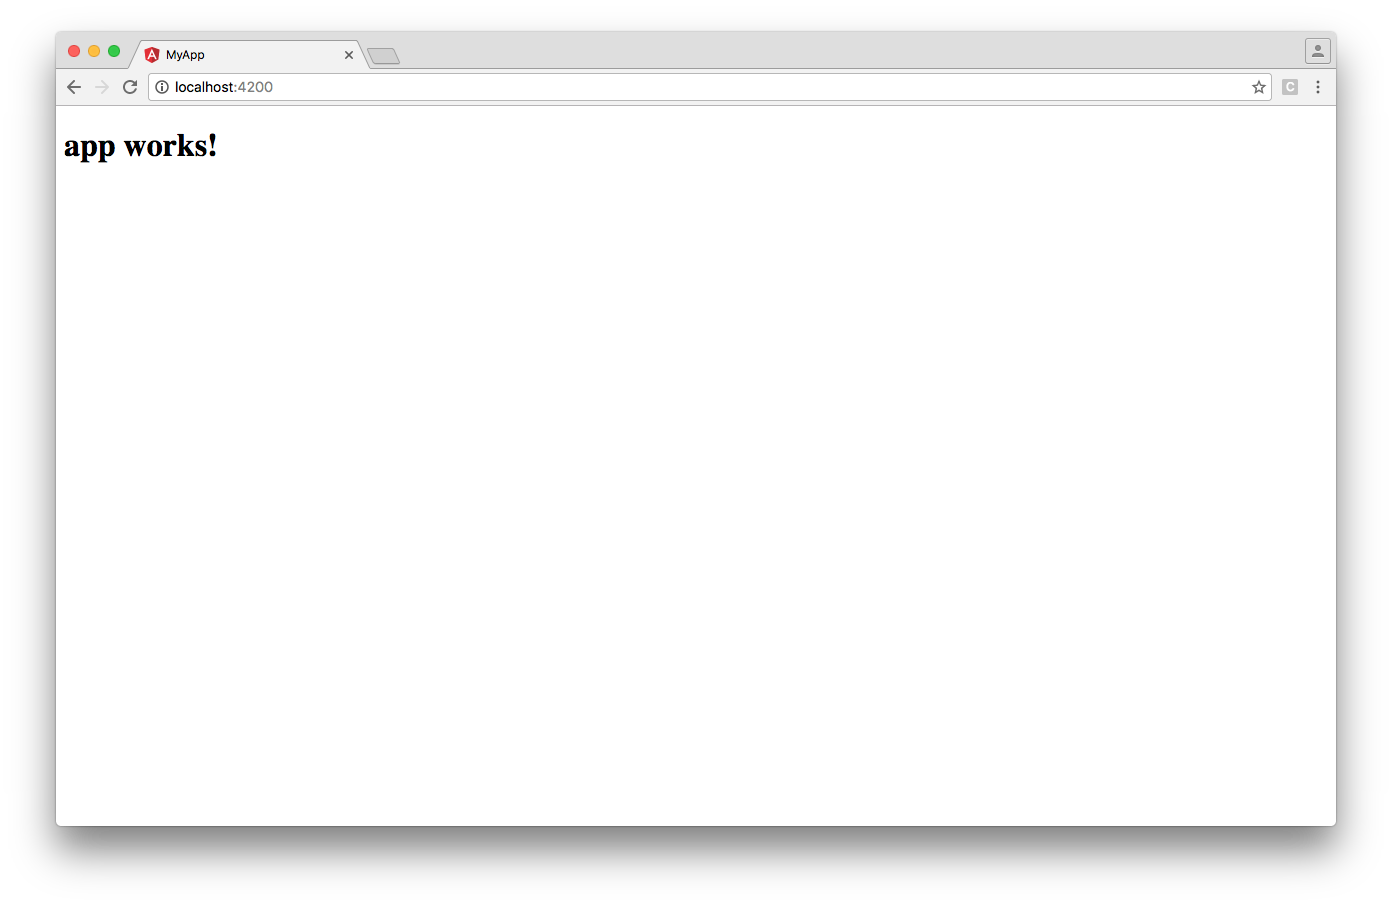 Angular CLI: Browser window showing 'app works!' text